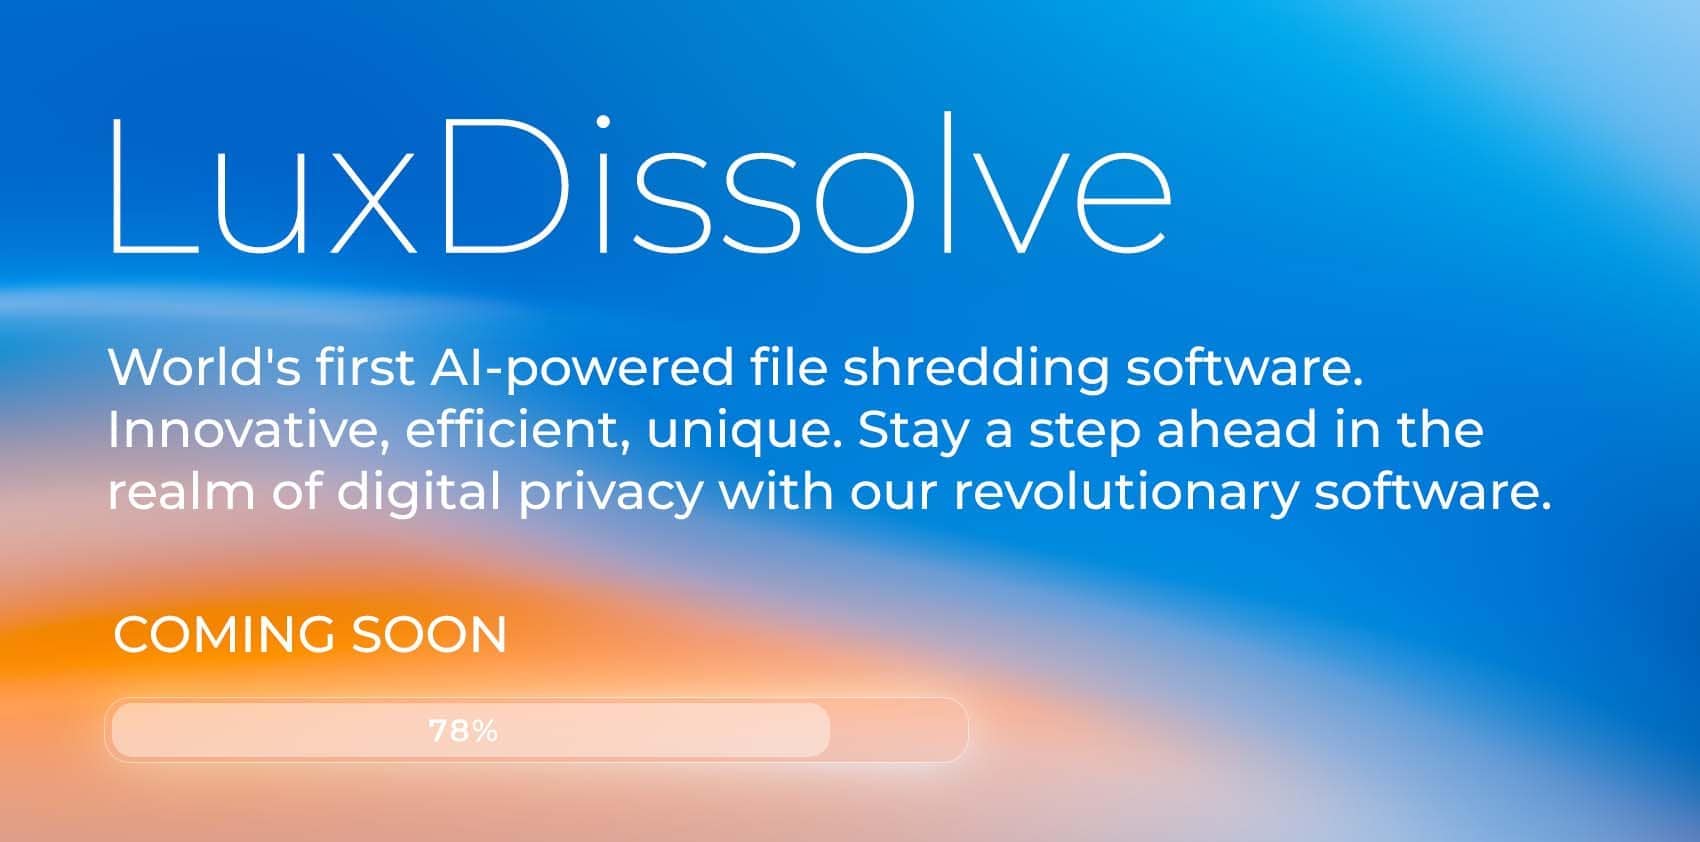 New Ambeteco product. Coming soon. LuxDissolve: World's First AI-powered file shredding software. Innovative, efficient, unique. Stay a step ahead in the realm of digital privacy with our revolutionary software.